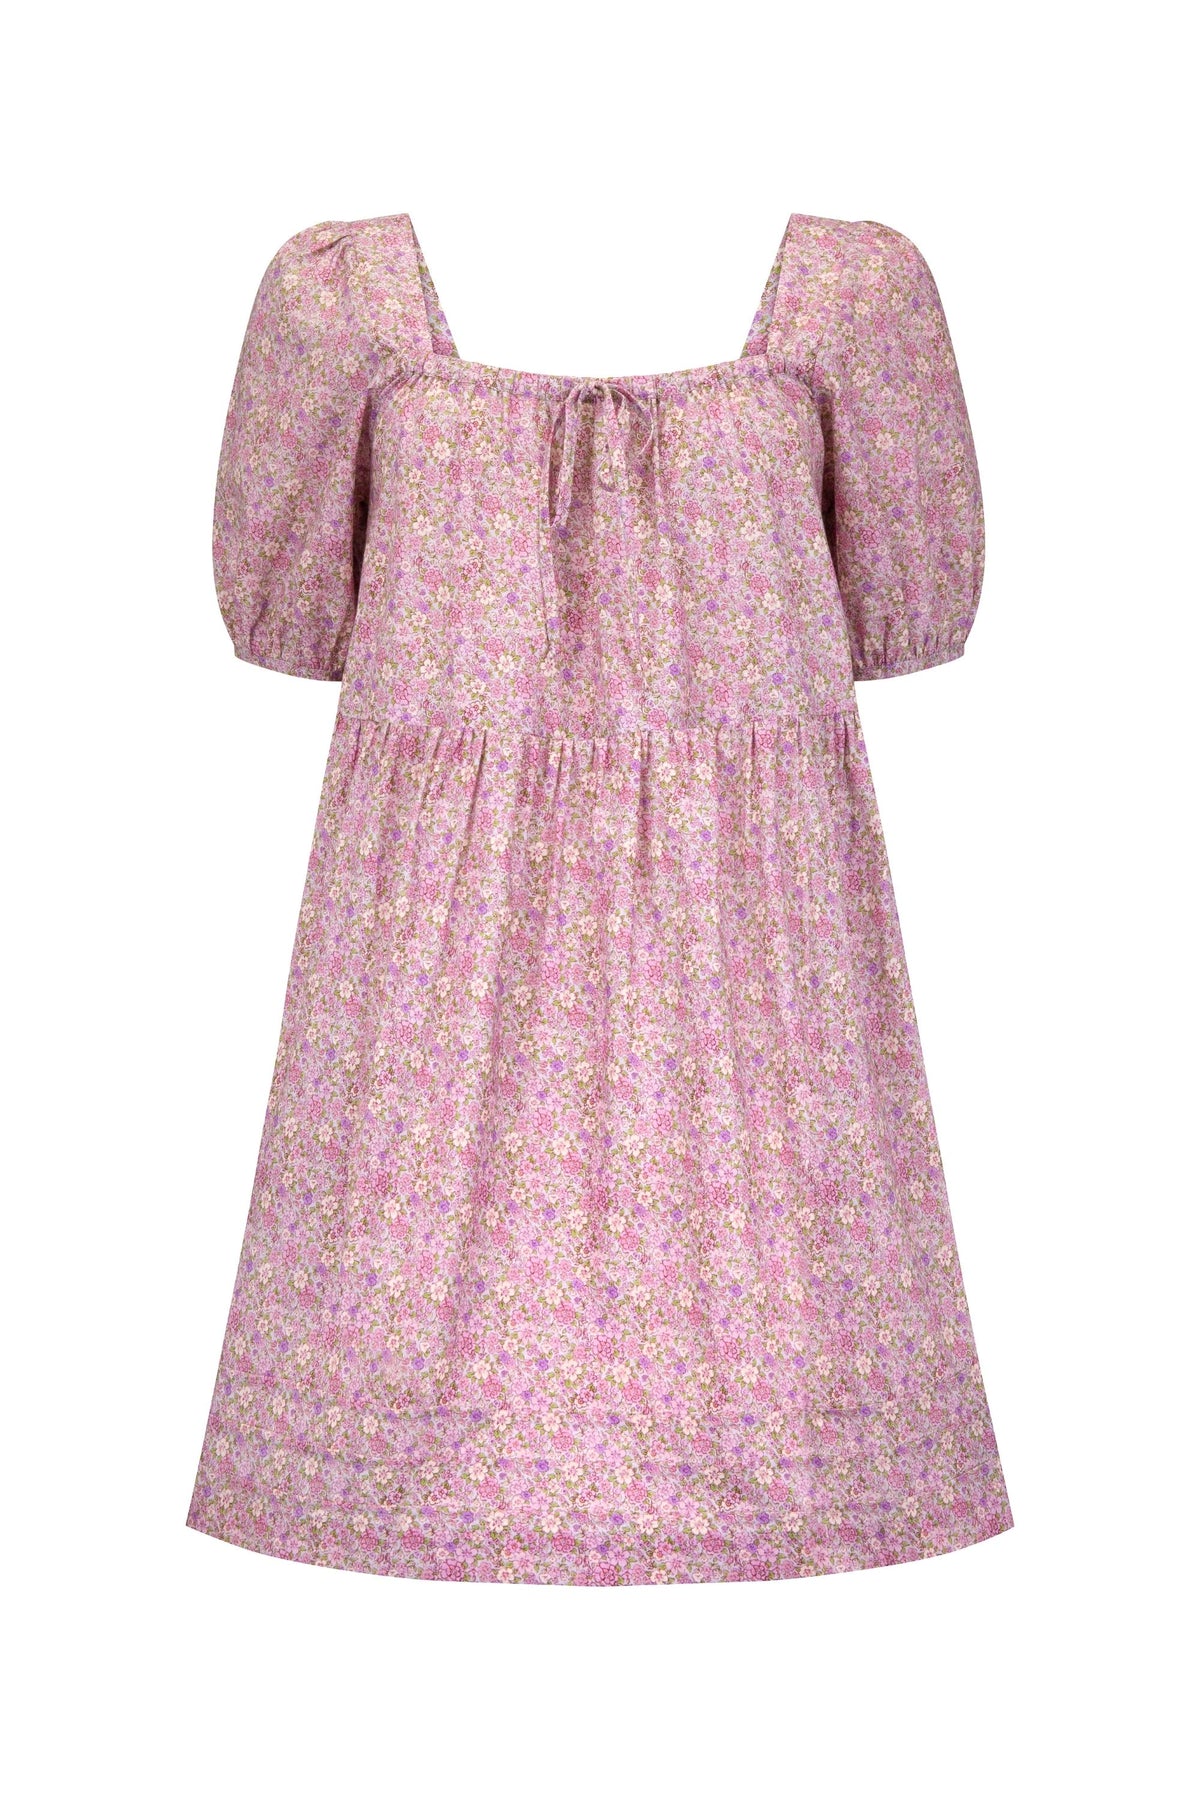 Ivy Smock in Dusty Lilac